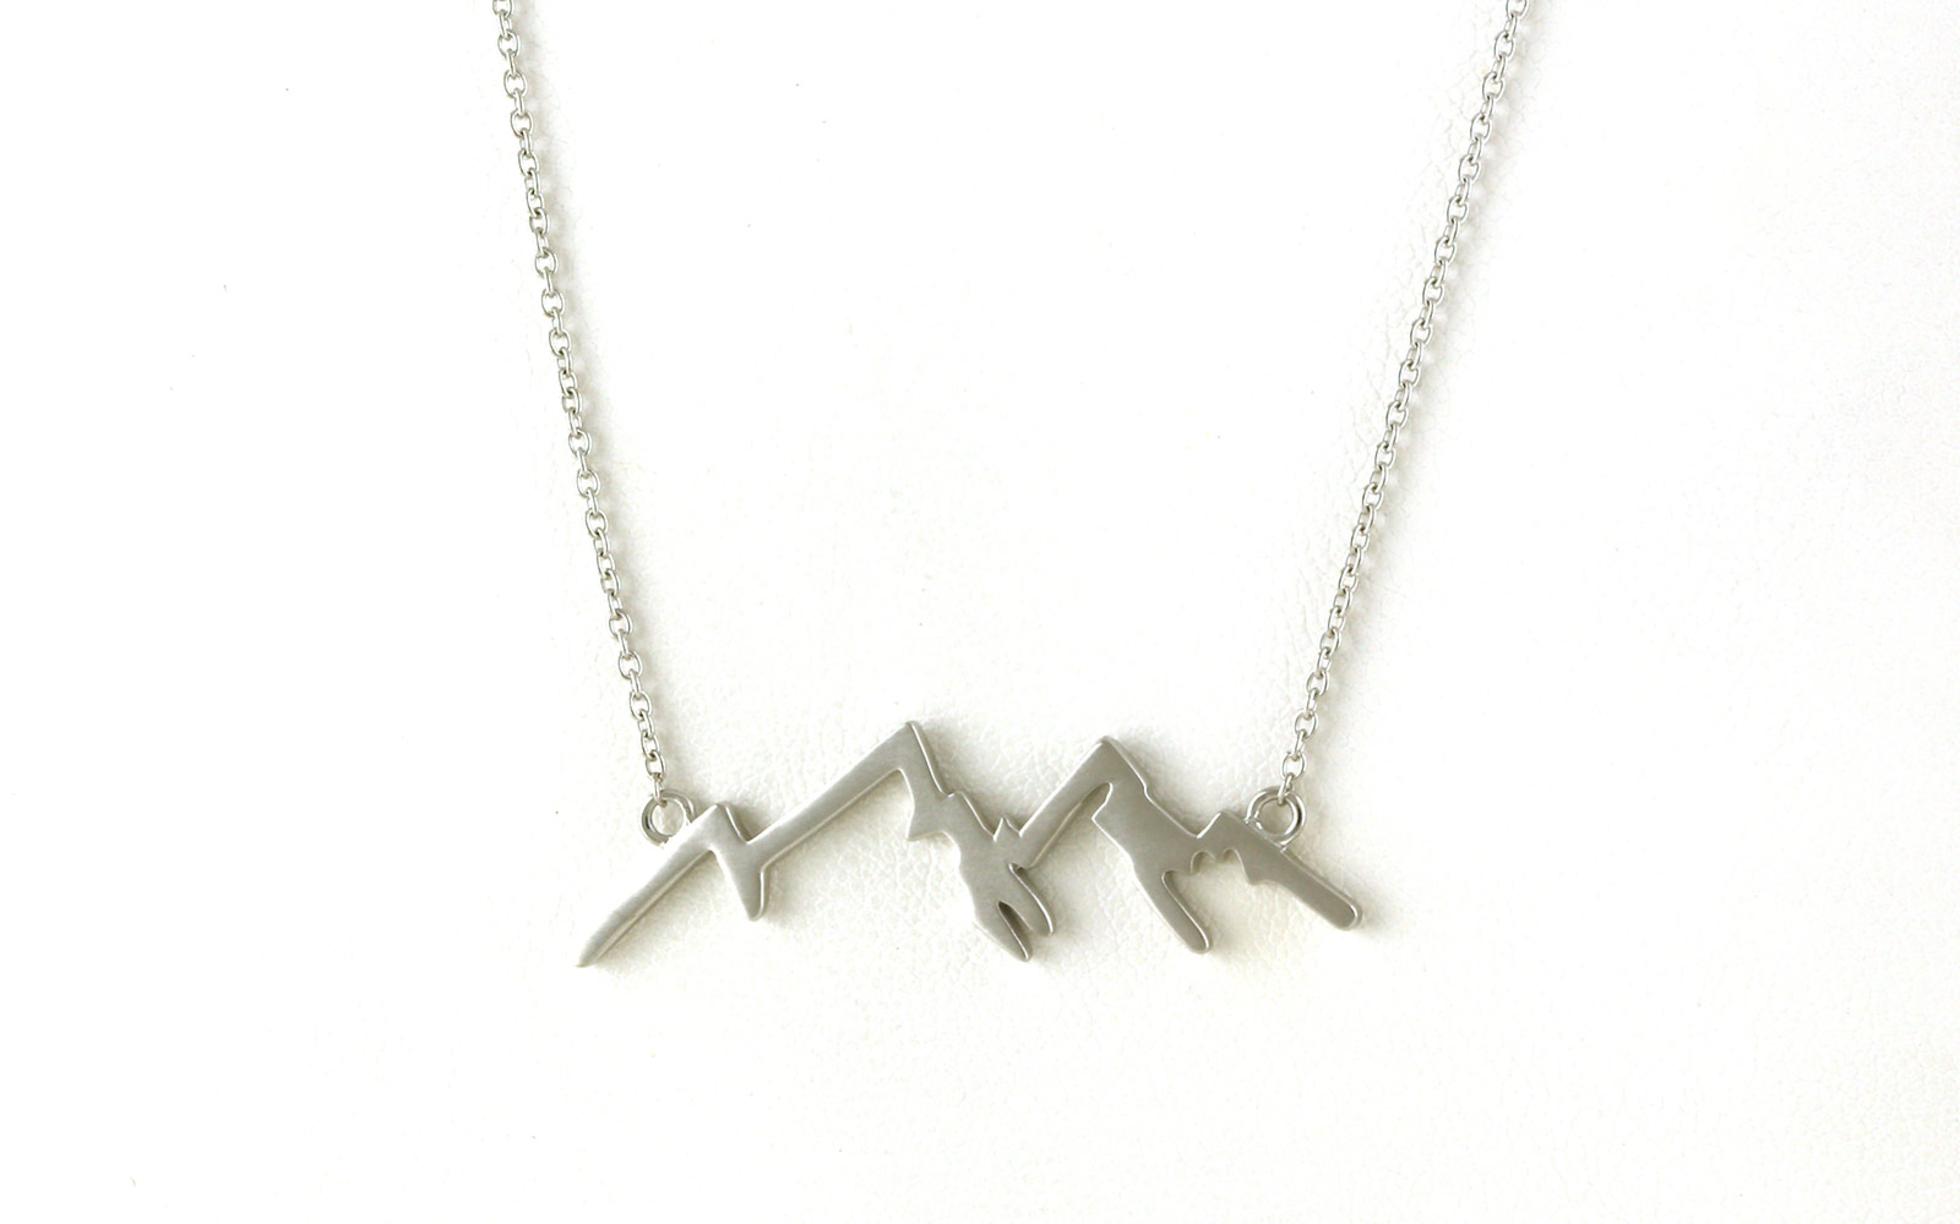 Mountain Ridgeline Necklace on Split Chain with Satin Finish in White Gold